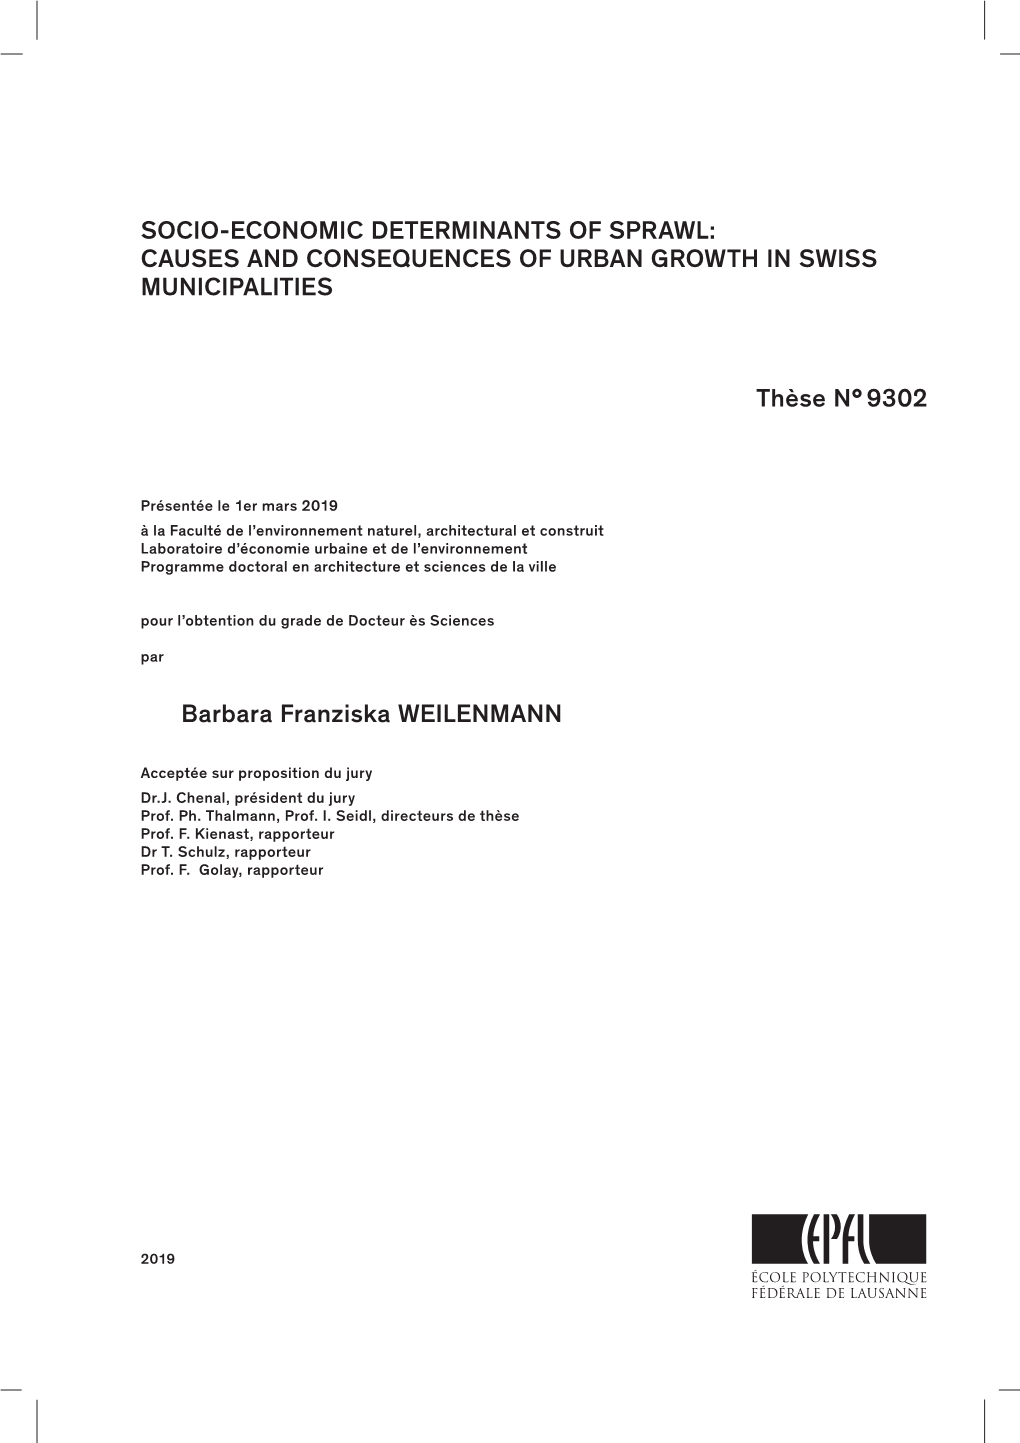 Socio-Economic Determinants of Sprawl: Causes and Consequences of Urban Growth in Swiss Municipalities